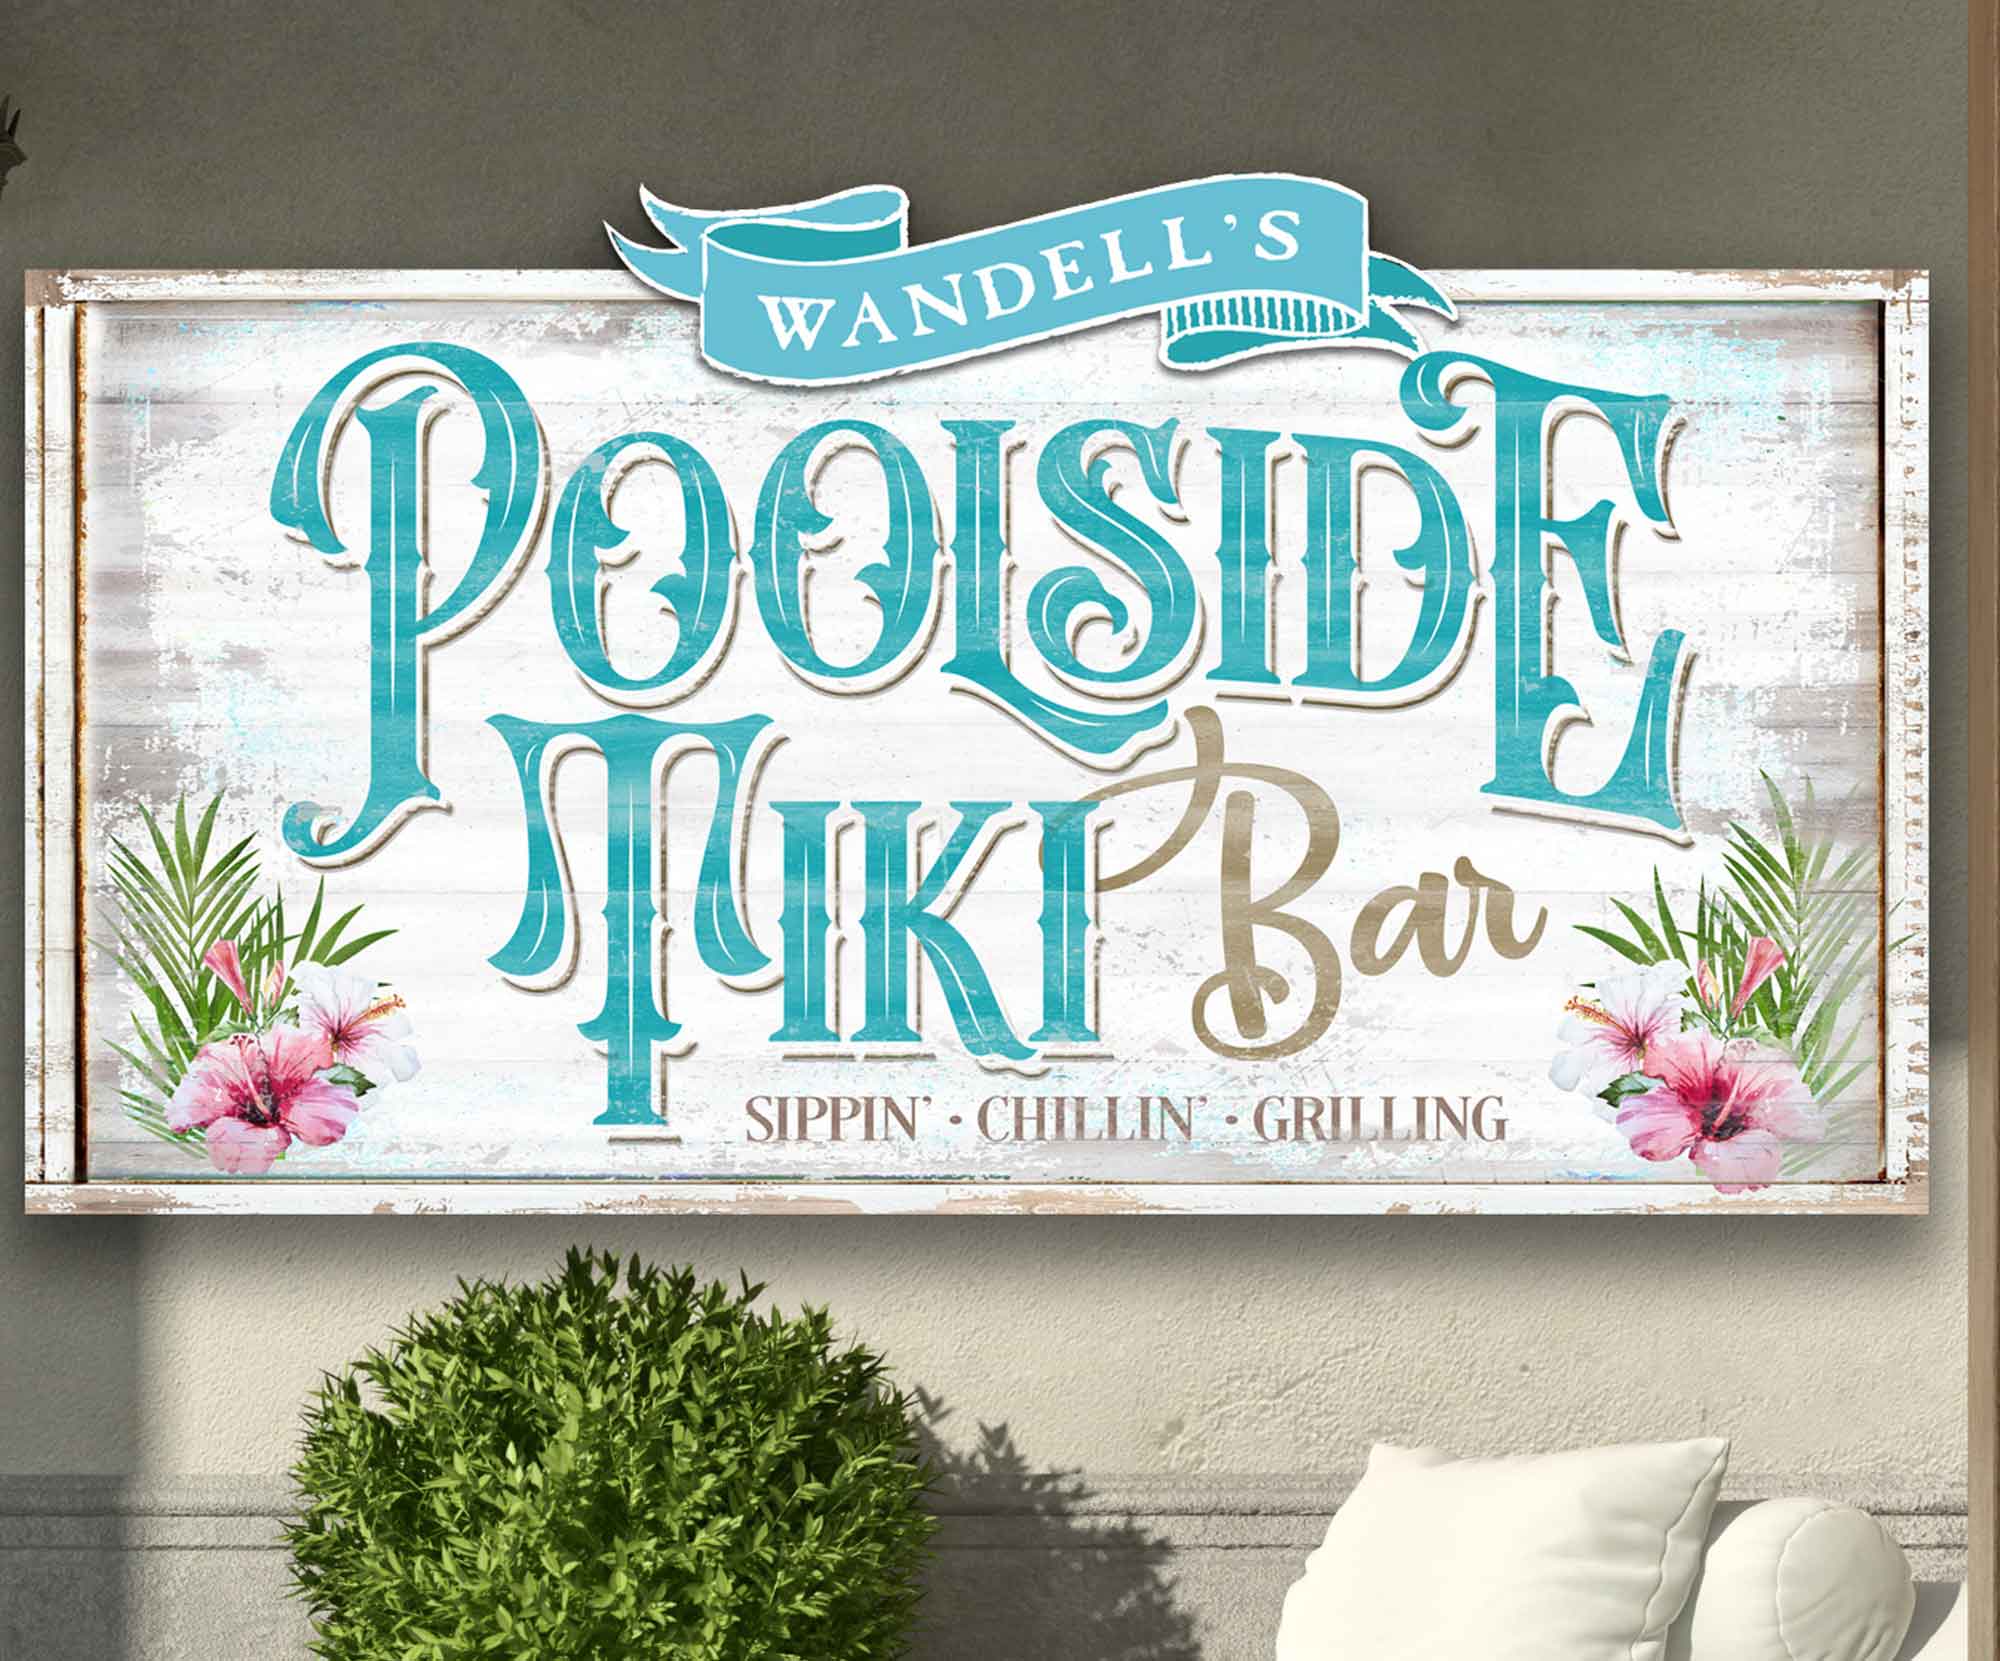 Poolside Tiki Bar Sign On Fauz Distressed Beach Wood With Family Name And Hibiscus Flowers. Tiki Bar Sign Says Sippin', Chillin', Grillin' 